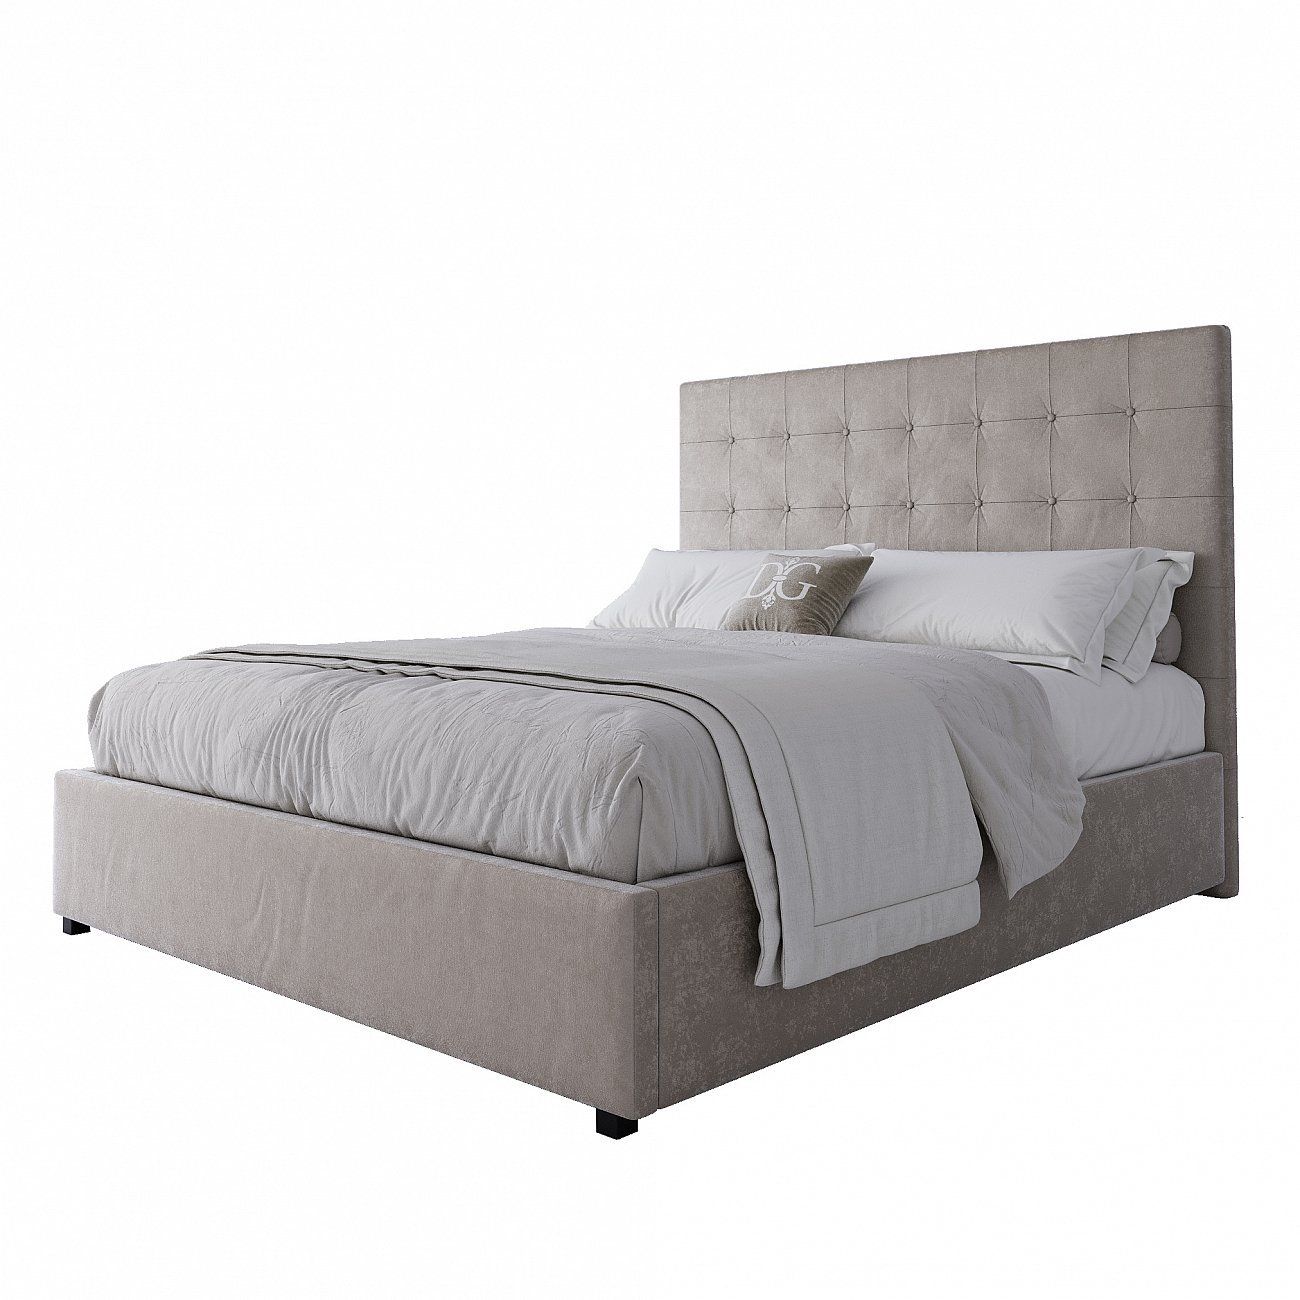 Double bed with upholstered headboard 160x200 cm light beige Royal Black